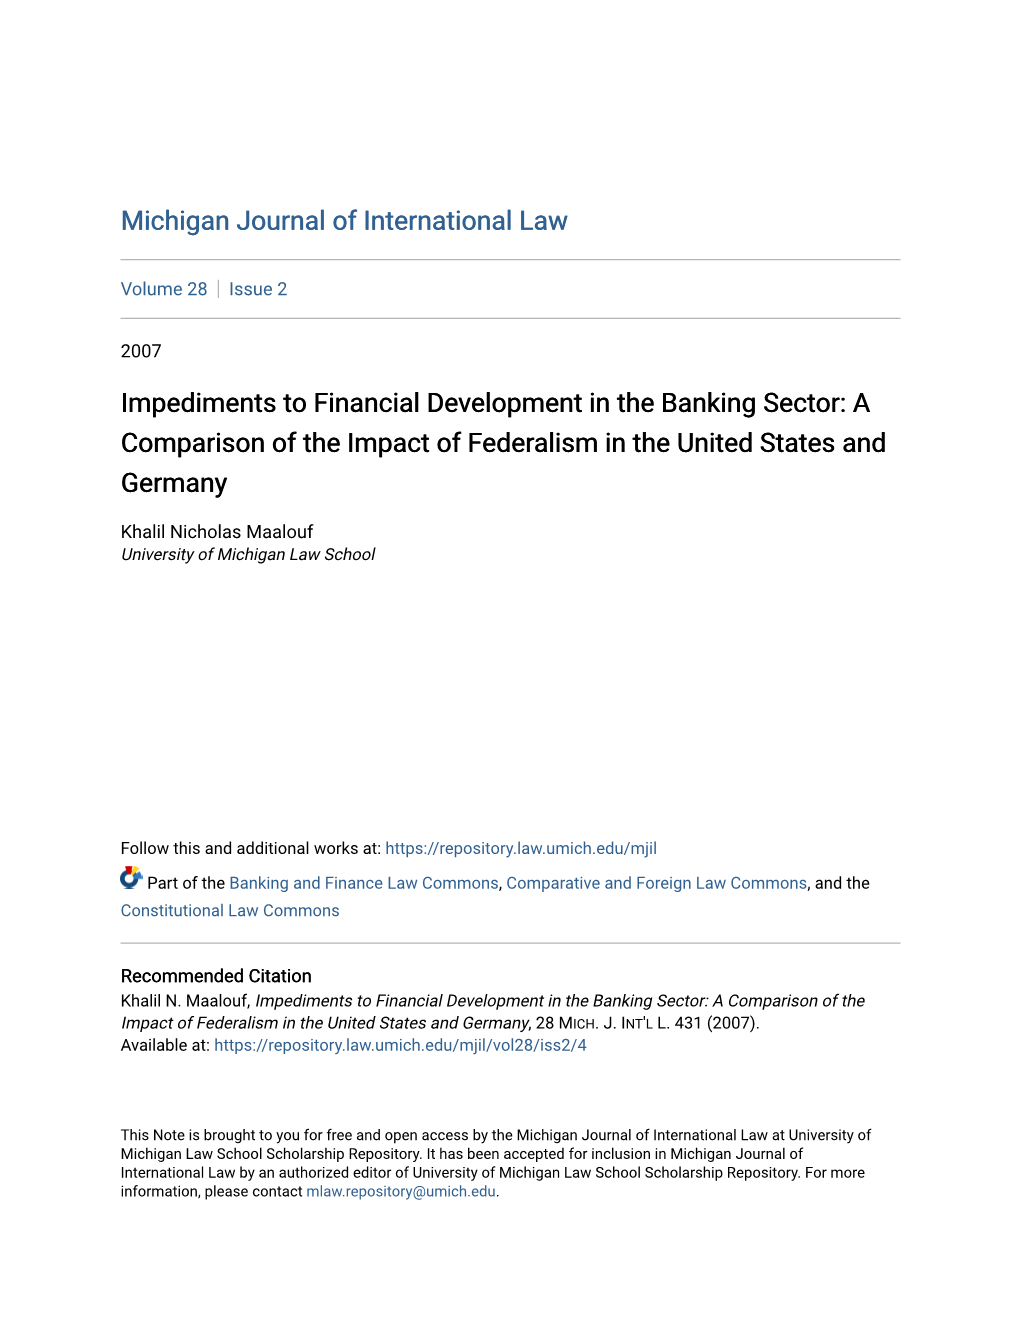 Impediments to Financial Development in the Banking Sector: a Comparison of the Impact of Federalism in the United States and Germany